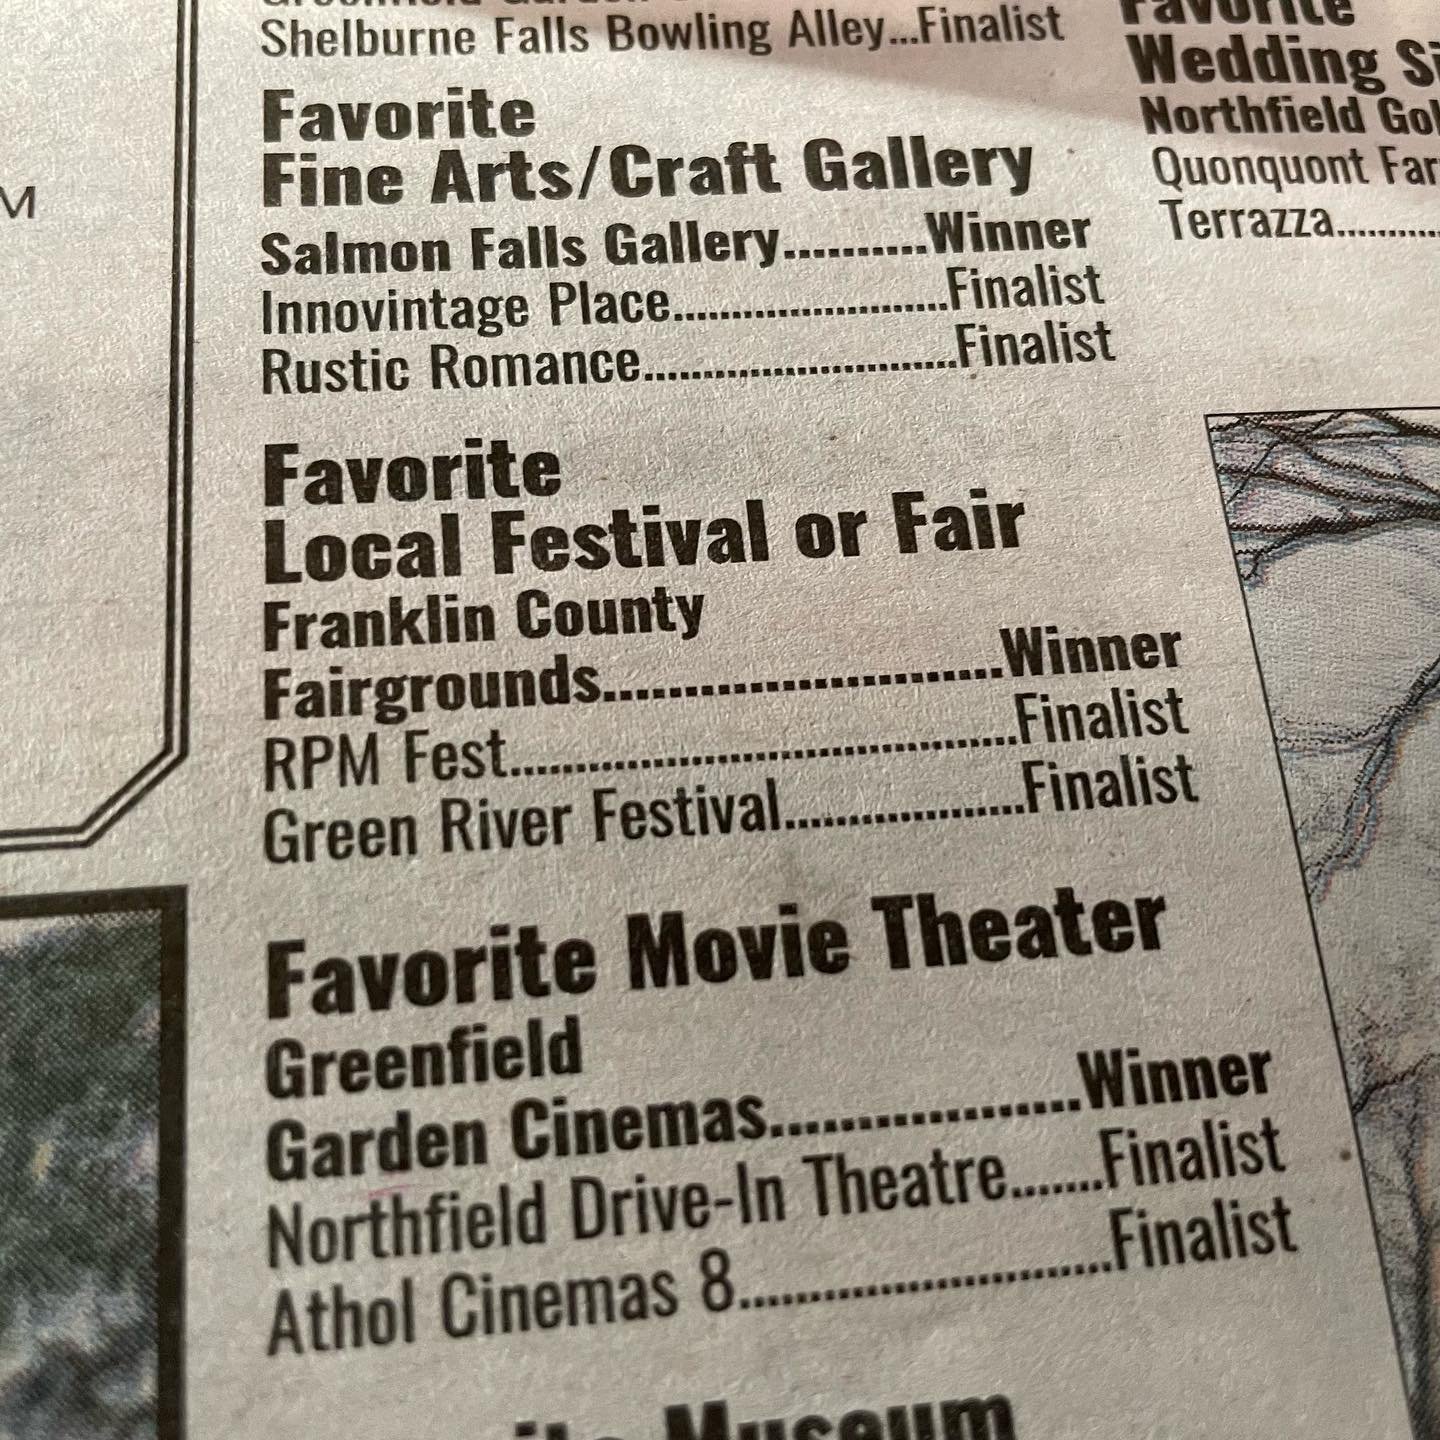 Check it out - RPM was voted one of the top 3 festivals or fairs in Franklin County, right next to @franklincountyfairgreenfieldma and @greenriverfest. Thanks to the Greenfield Recorder for the highlight!